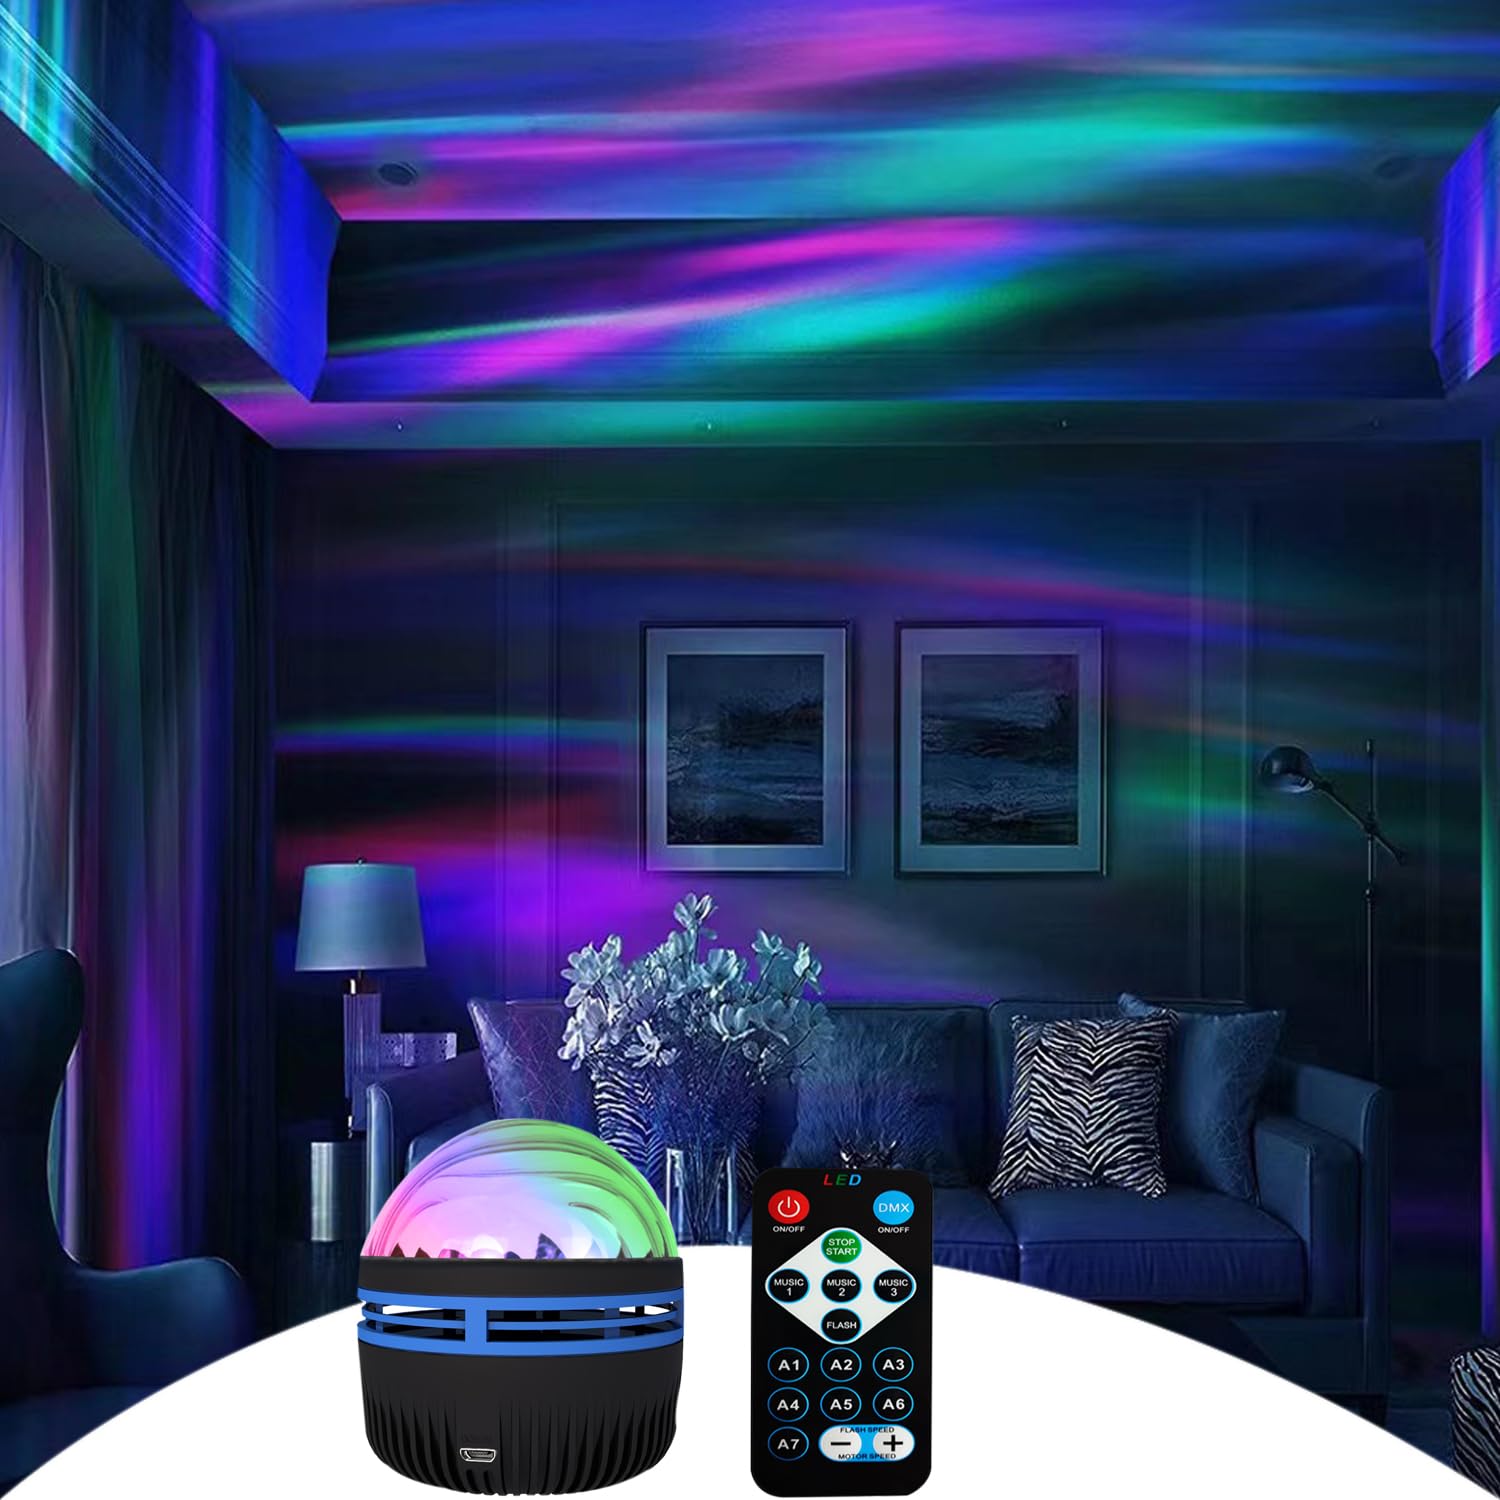 2 in 1 Northern Lights and Ocean Wave Projector with 14 Light Effects for Bedroom, Game Rooms, Home Theater, Birthday, Party